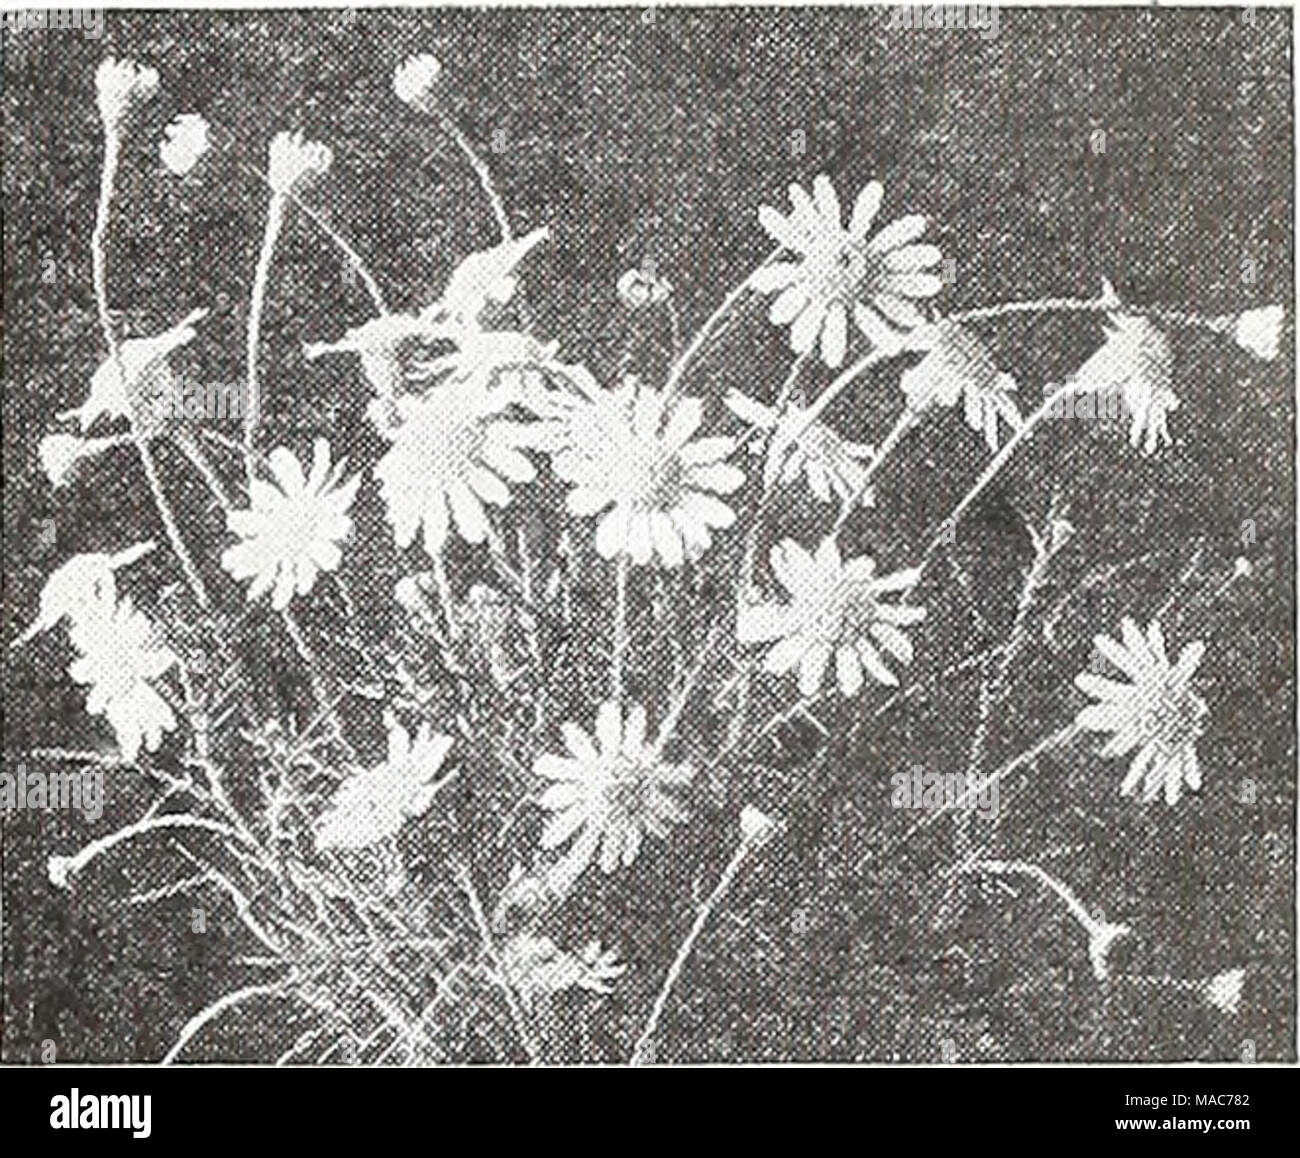 . Dreer's novelties and specialties for 1948 : three superb zinnias for every garden . Dahlborg Daisy DahEborg Daisy ® A 2121 {Thymophylla tenuiloba) A splendid dwarf plant, 6 in. high, forming cushions 8 in. across. The lemon-scented foliage is studded freely with tiny daisy-like blossoms of a brilliant rich golden-yellow color. Flowers from late spring until fall. Excellent for beds and edging. Pkt. 2Sc; large pkt. 7Sc. Stock Photo